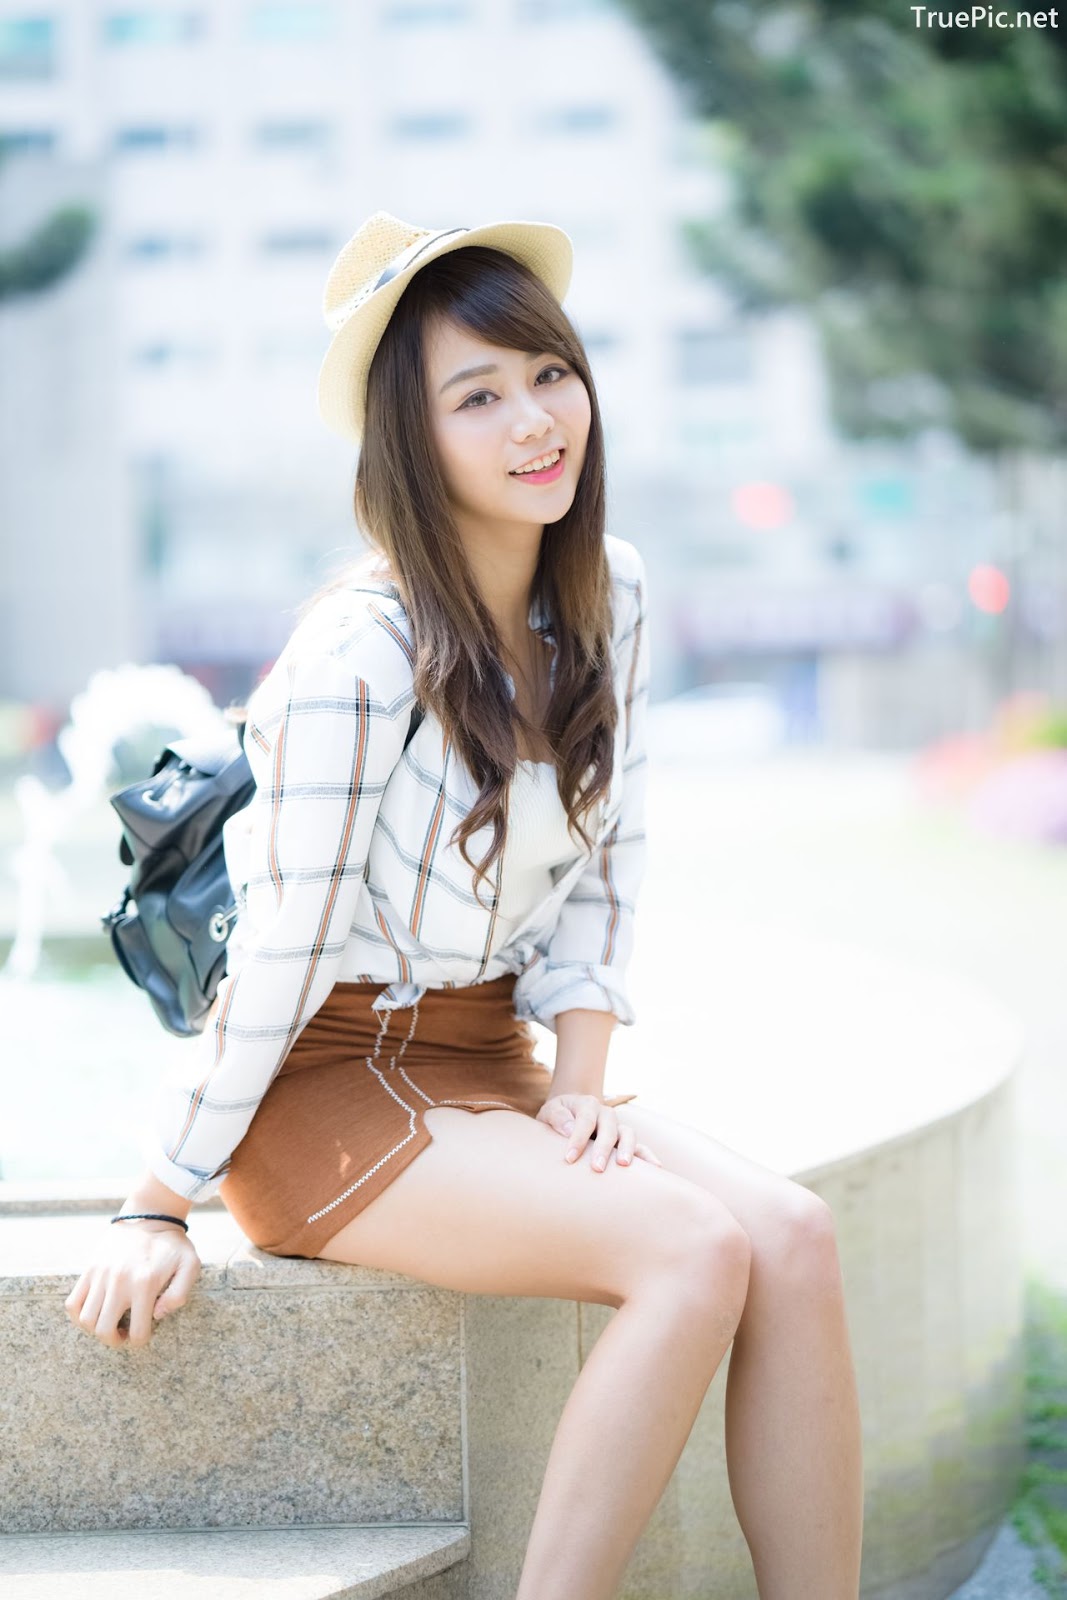 Image-Taiwan-Social-Celebrity-Sun-Hui-Tong-孫卉彤-A-Day-as-Student-Girl-TruePic.net- Picture-68